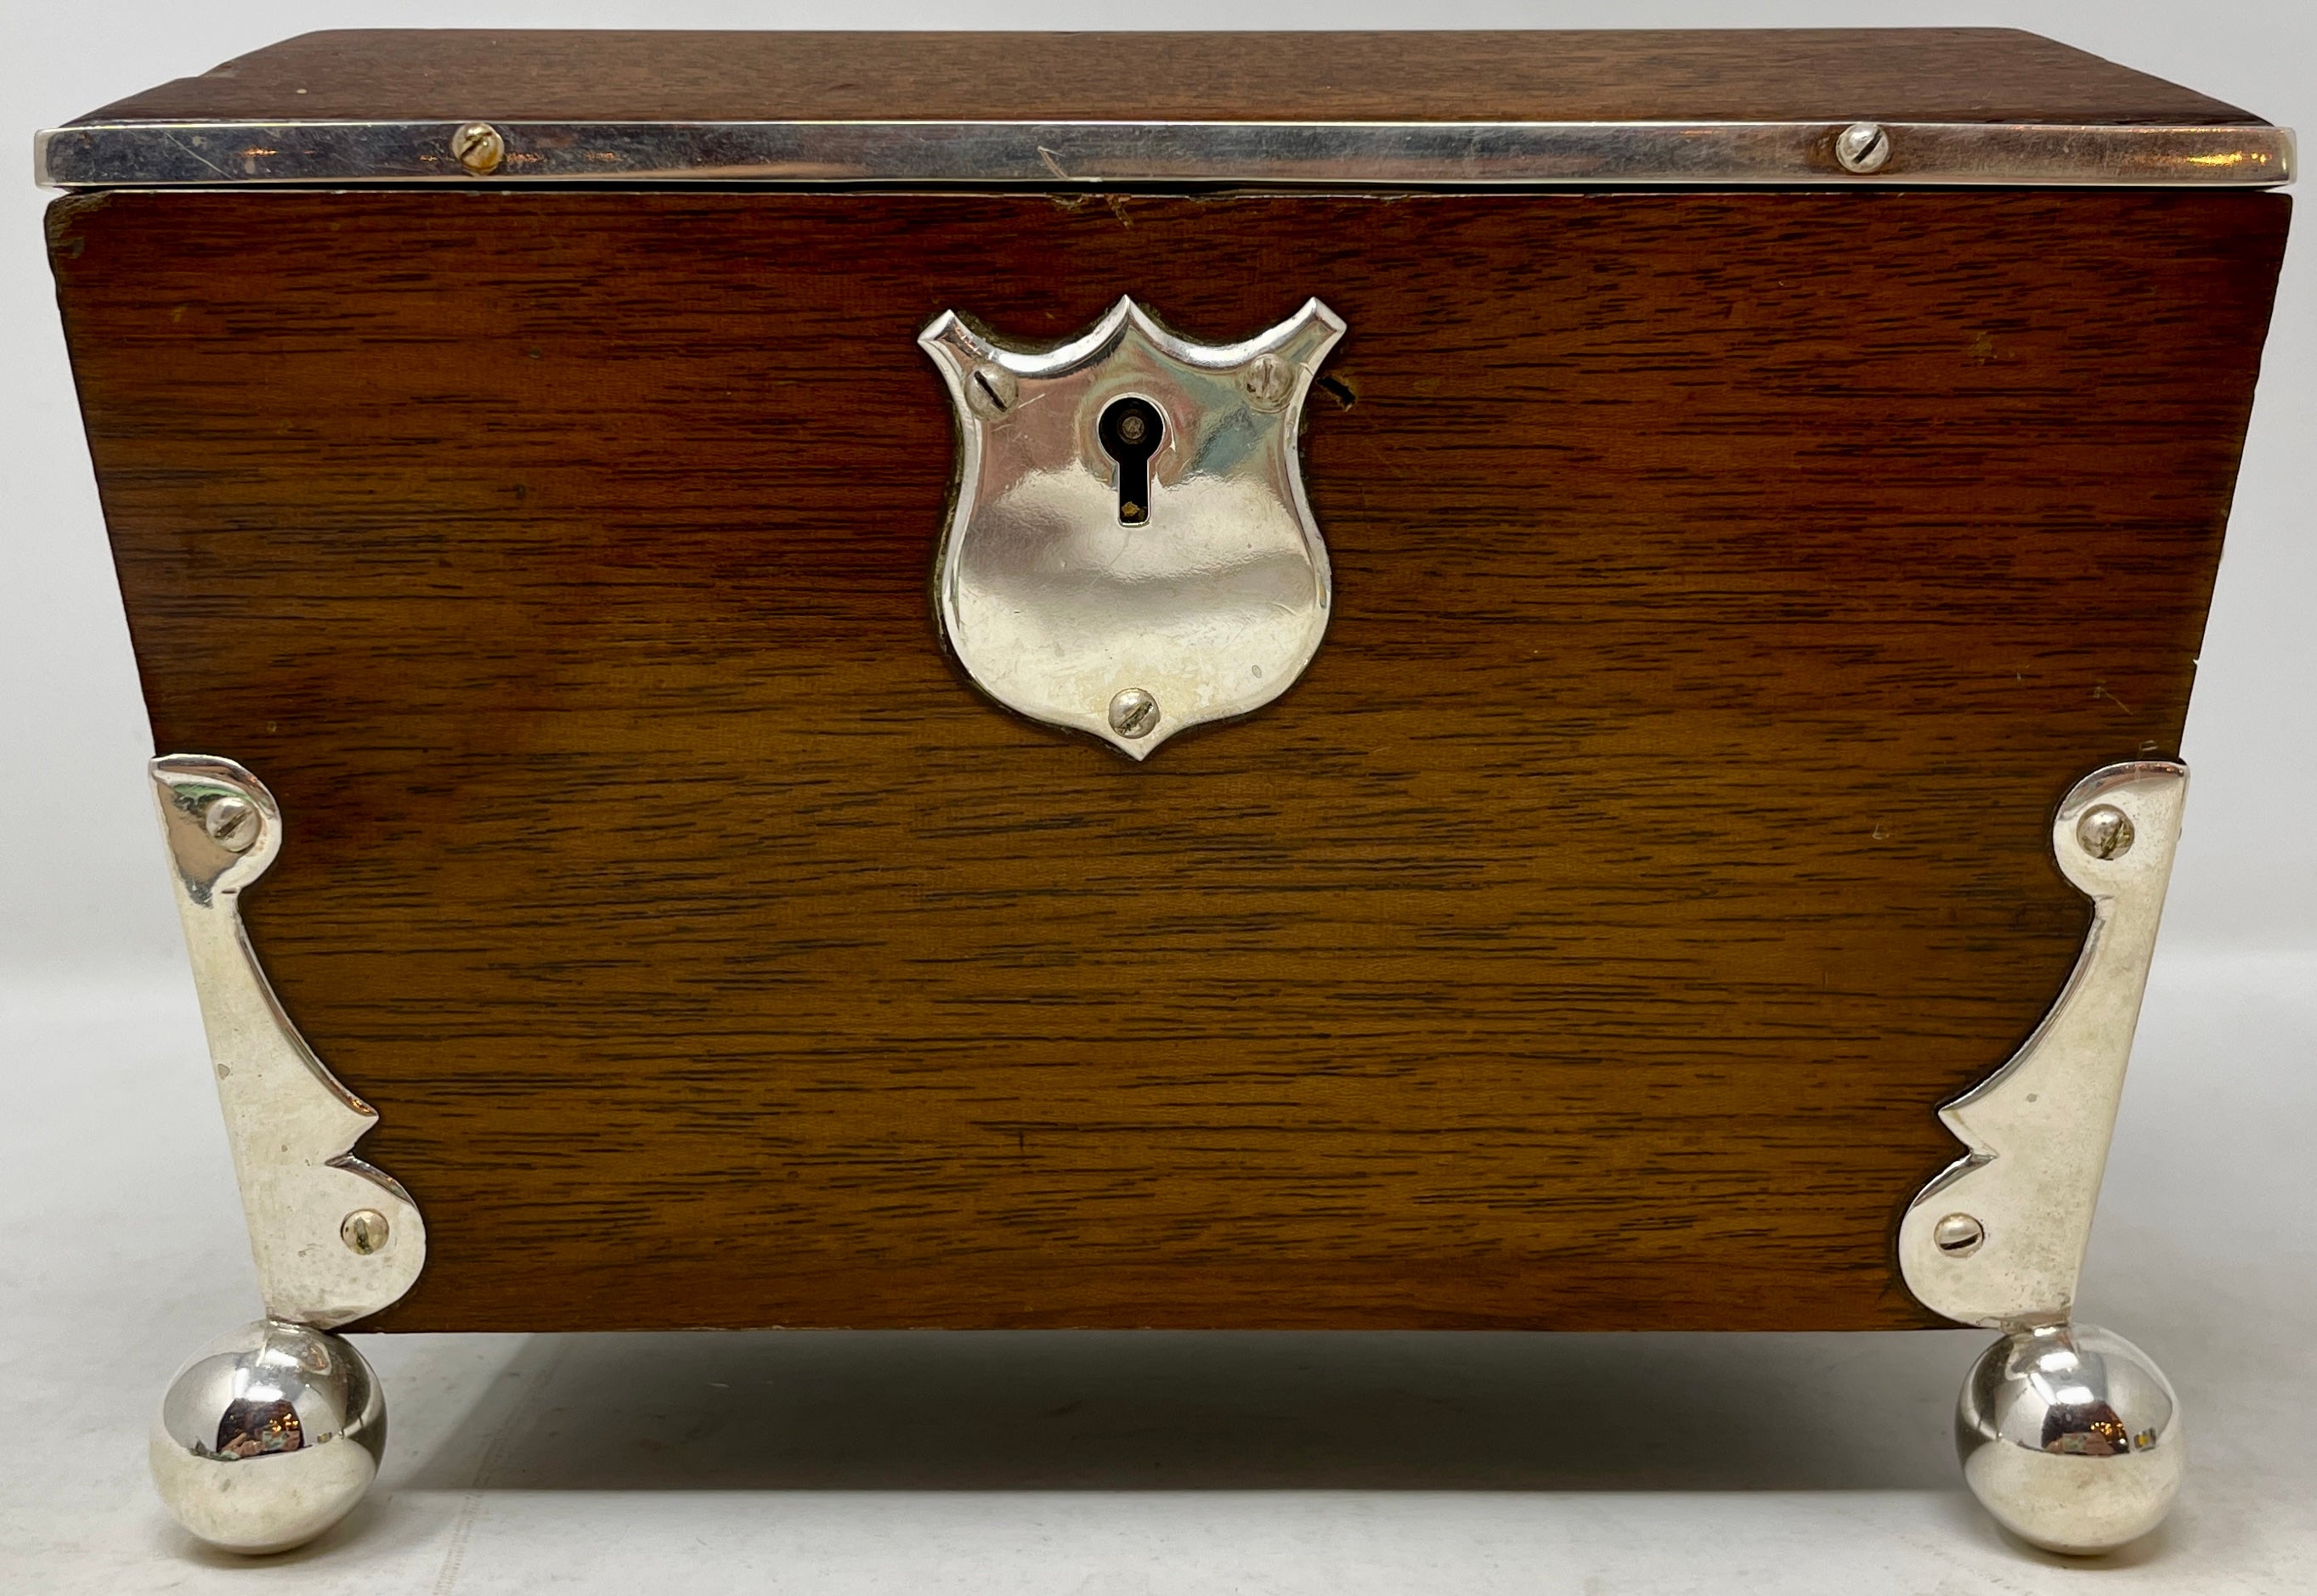 Antique English Victorian Mahogany tea caddy with silver-plated mounts, Circa 1890's.